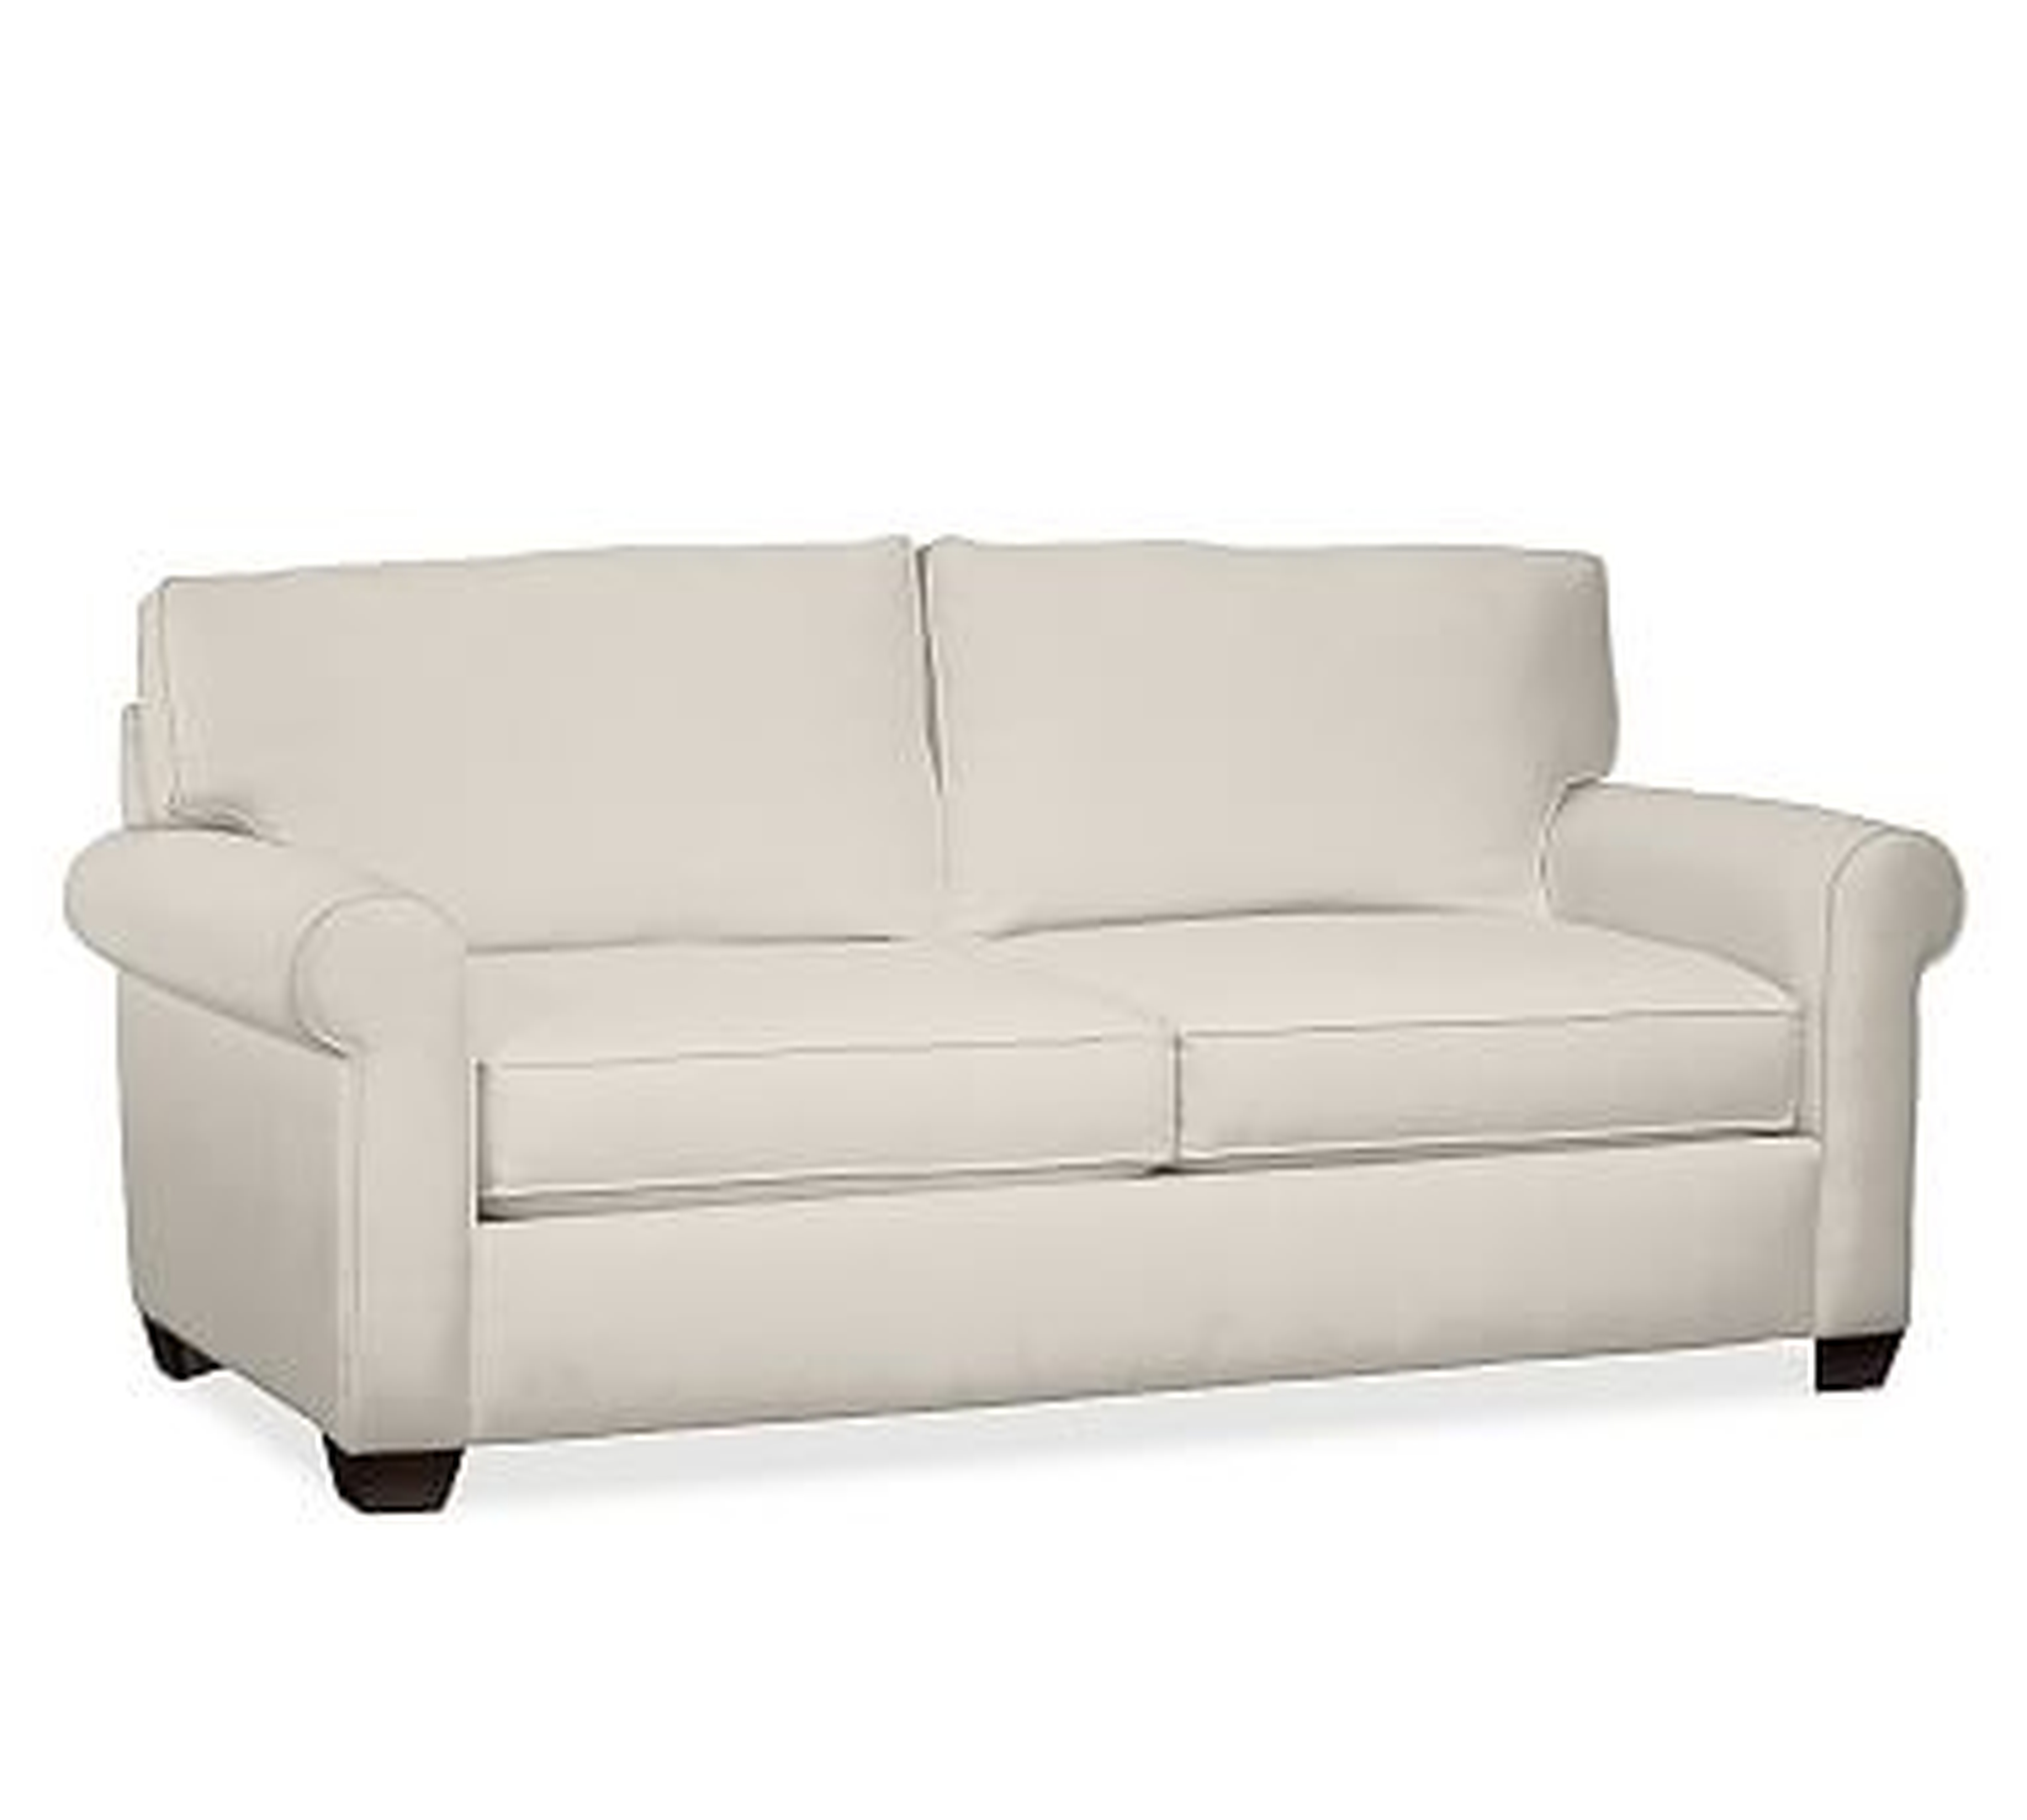 Buchanan Roll Arm Upholstered Loveseat 79", Polyester Wrapped Cushions, Performance Twill Cream - Pottery Barn